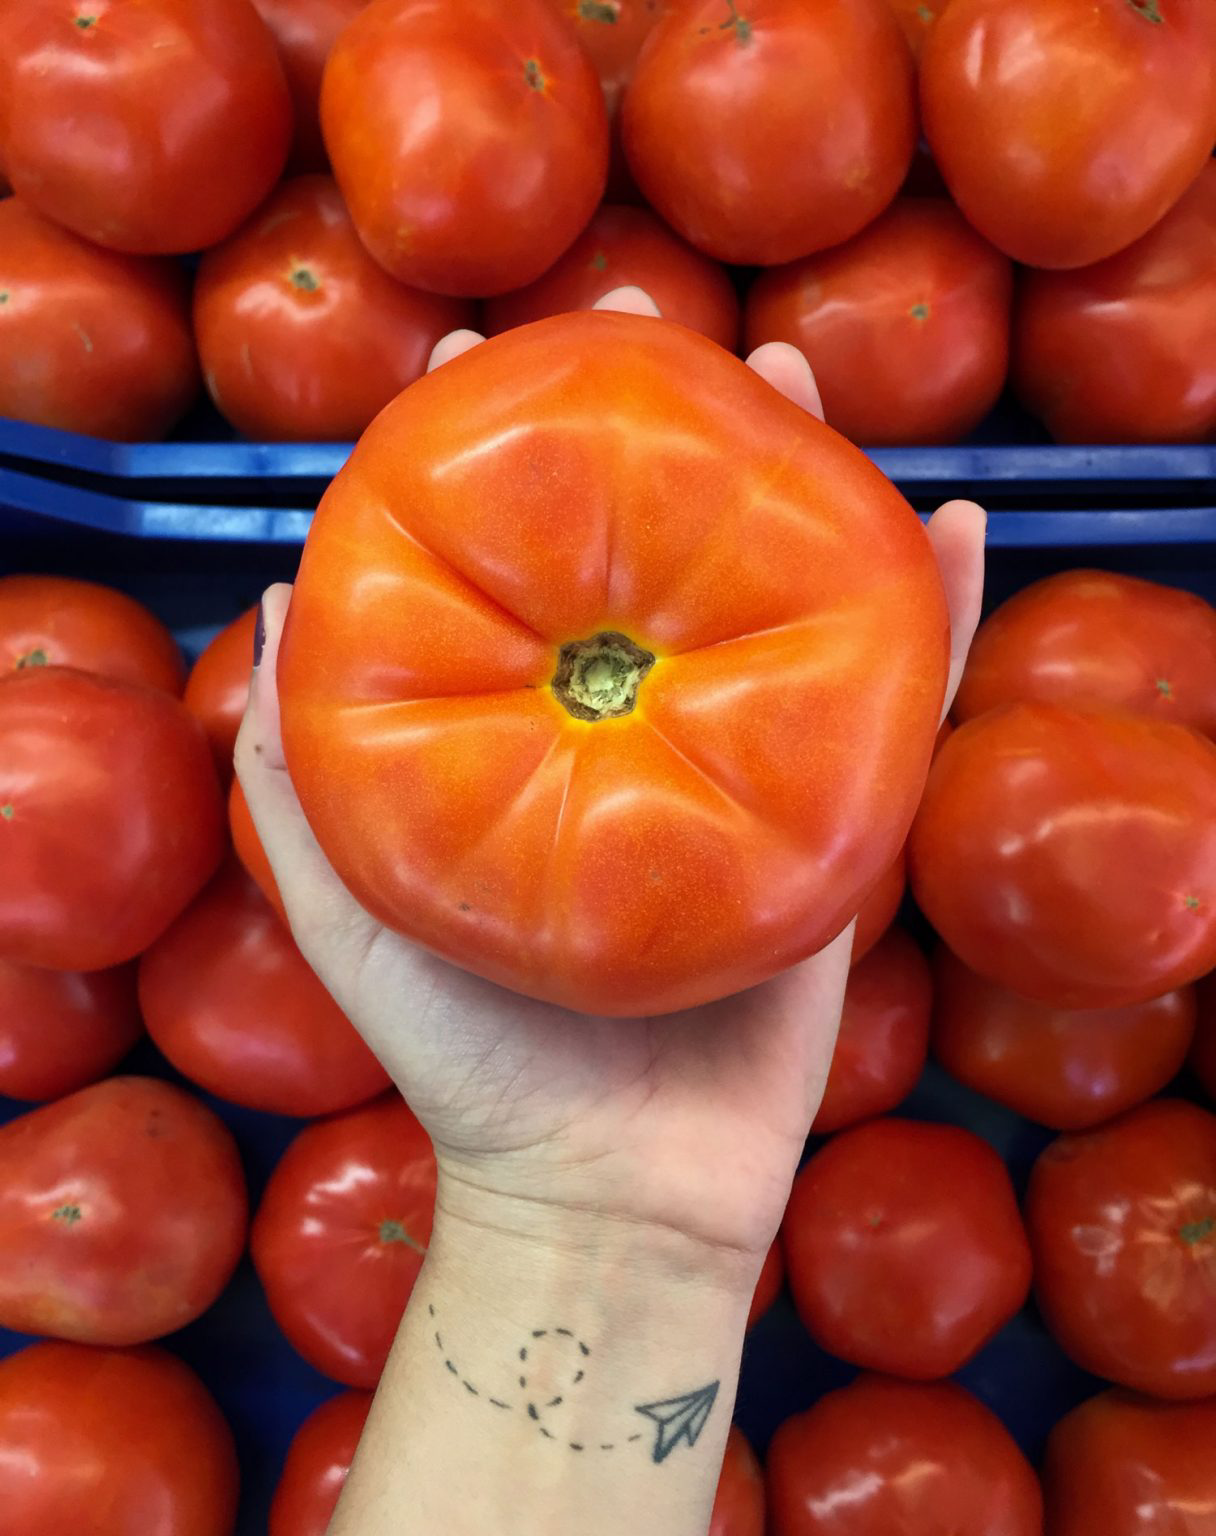 A person grasping a large, red tomato.